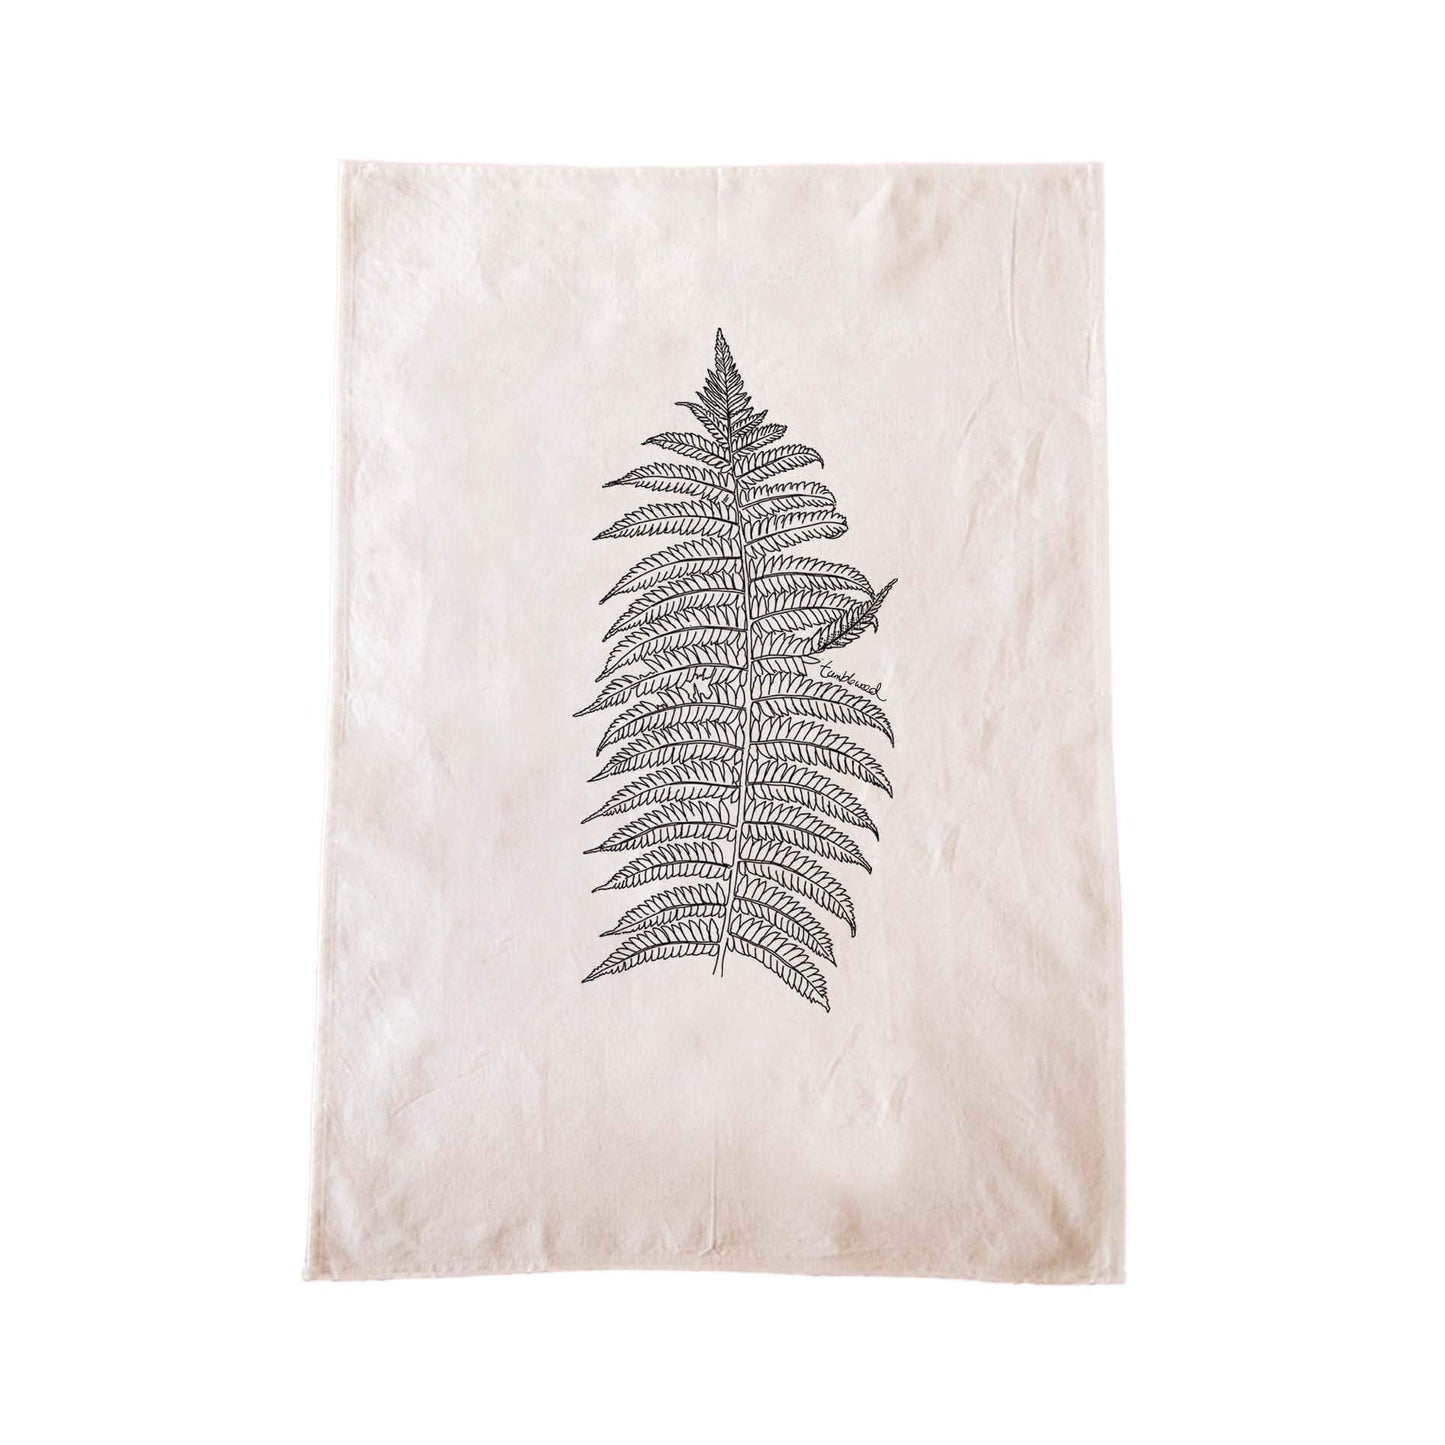 Off-white cotton tea towel with a screen printed Silver fern/ponga design.